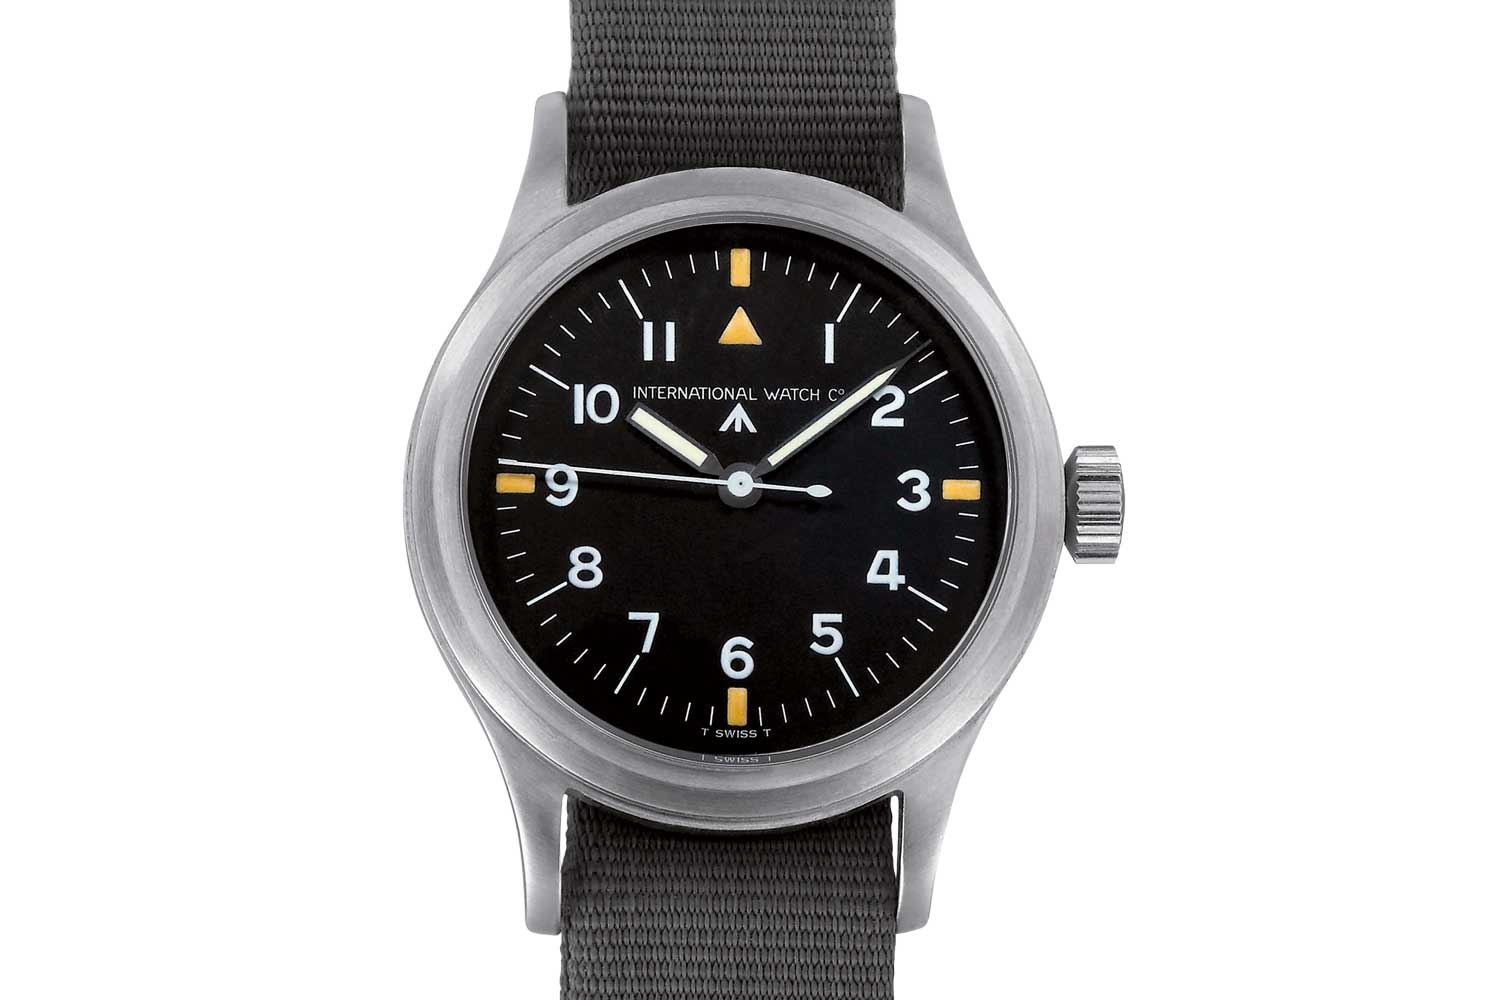 Arguably the most famous IWC Pilot’s Watch, the Navigator’s Wristwatch Mark 11